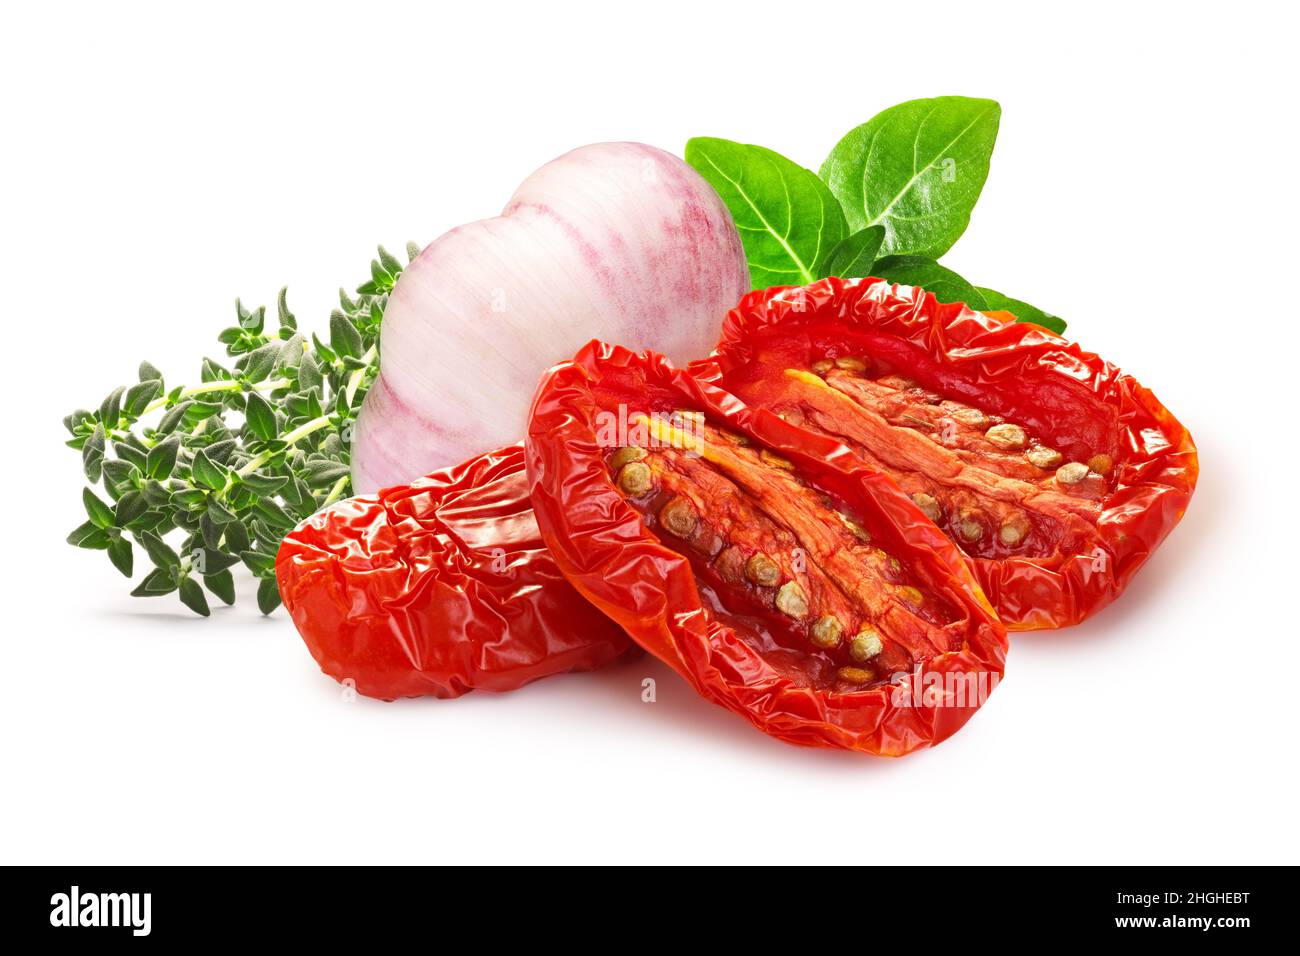 Dried or Sundried tomato halves with herbs and garlic isolated Stock Photo